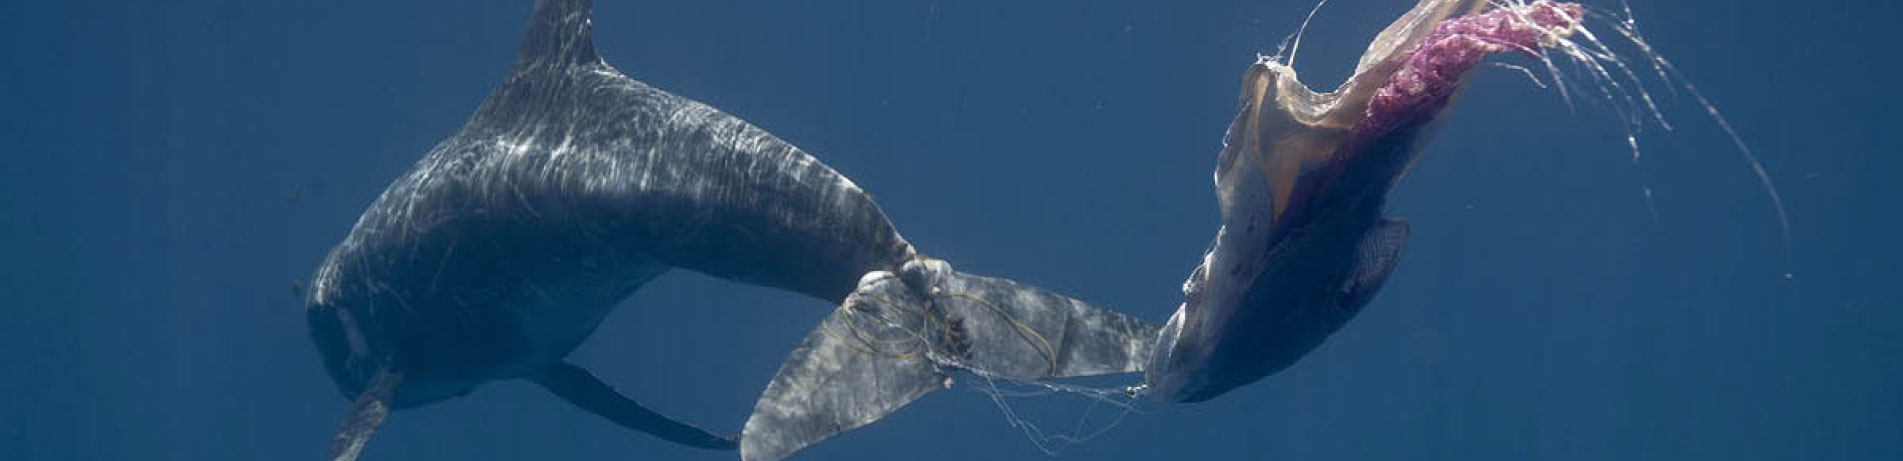 Cetacean with its tail entangled in plastic debris